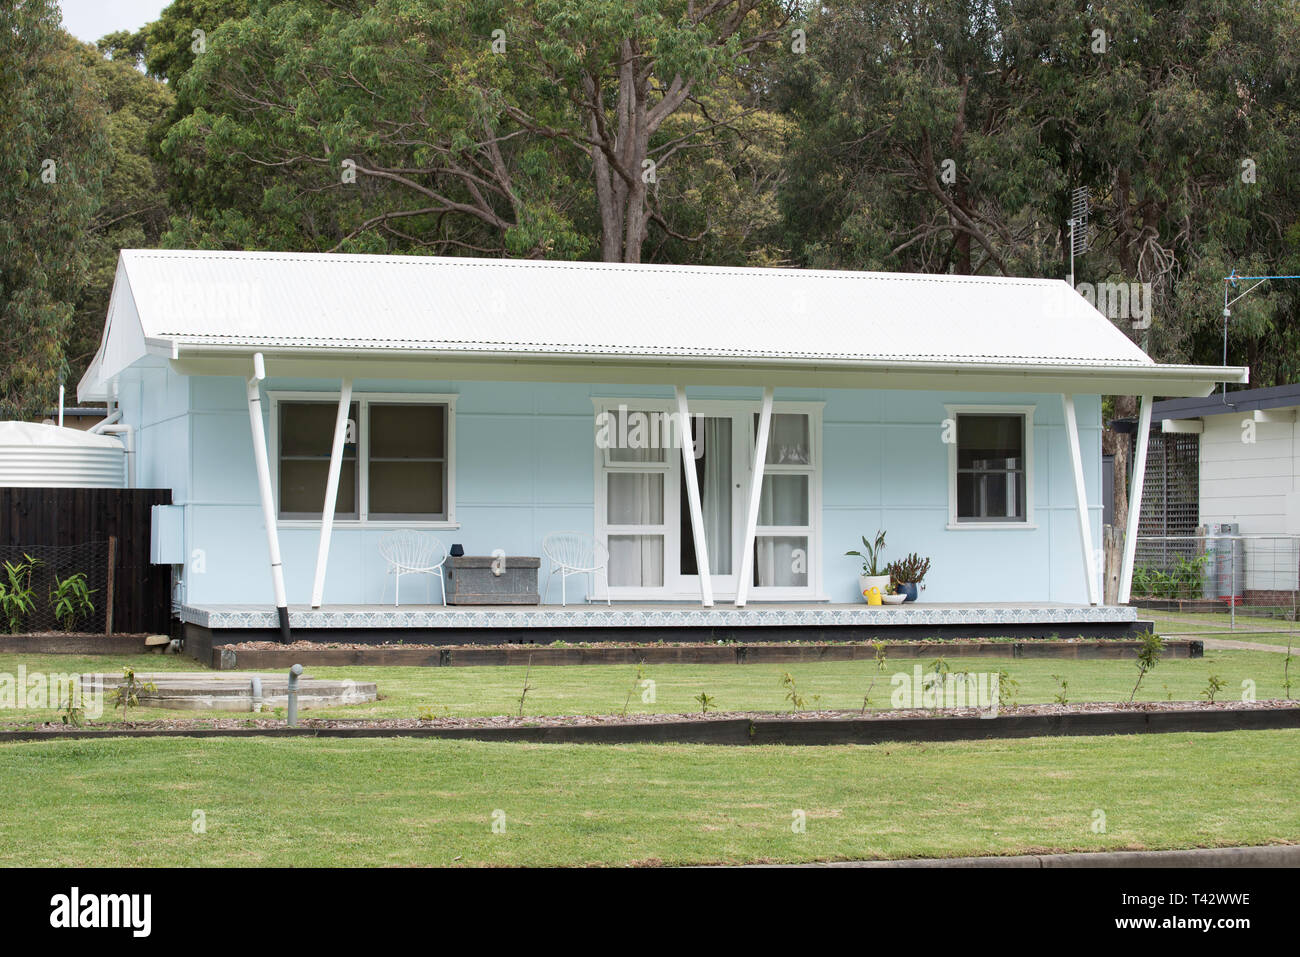 A post war weatherboard timber and steel corrugated iron roofed holiday cottage in Kioloa on the New South Wales south coast of Australia Stock Photo